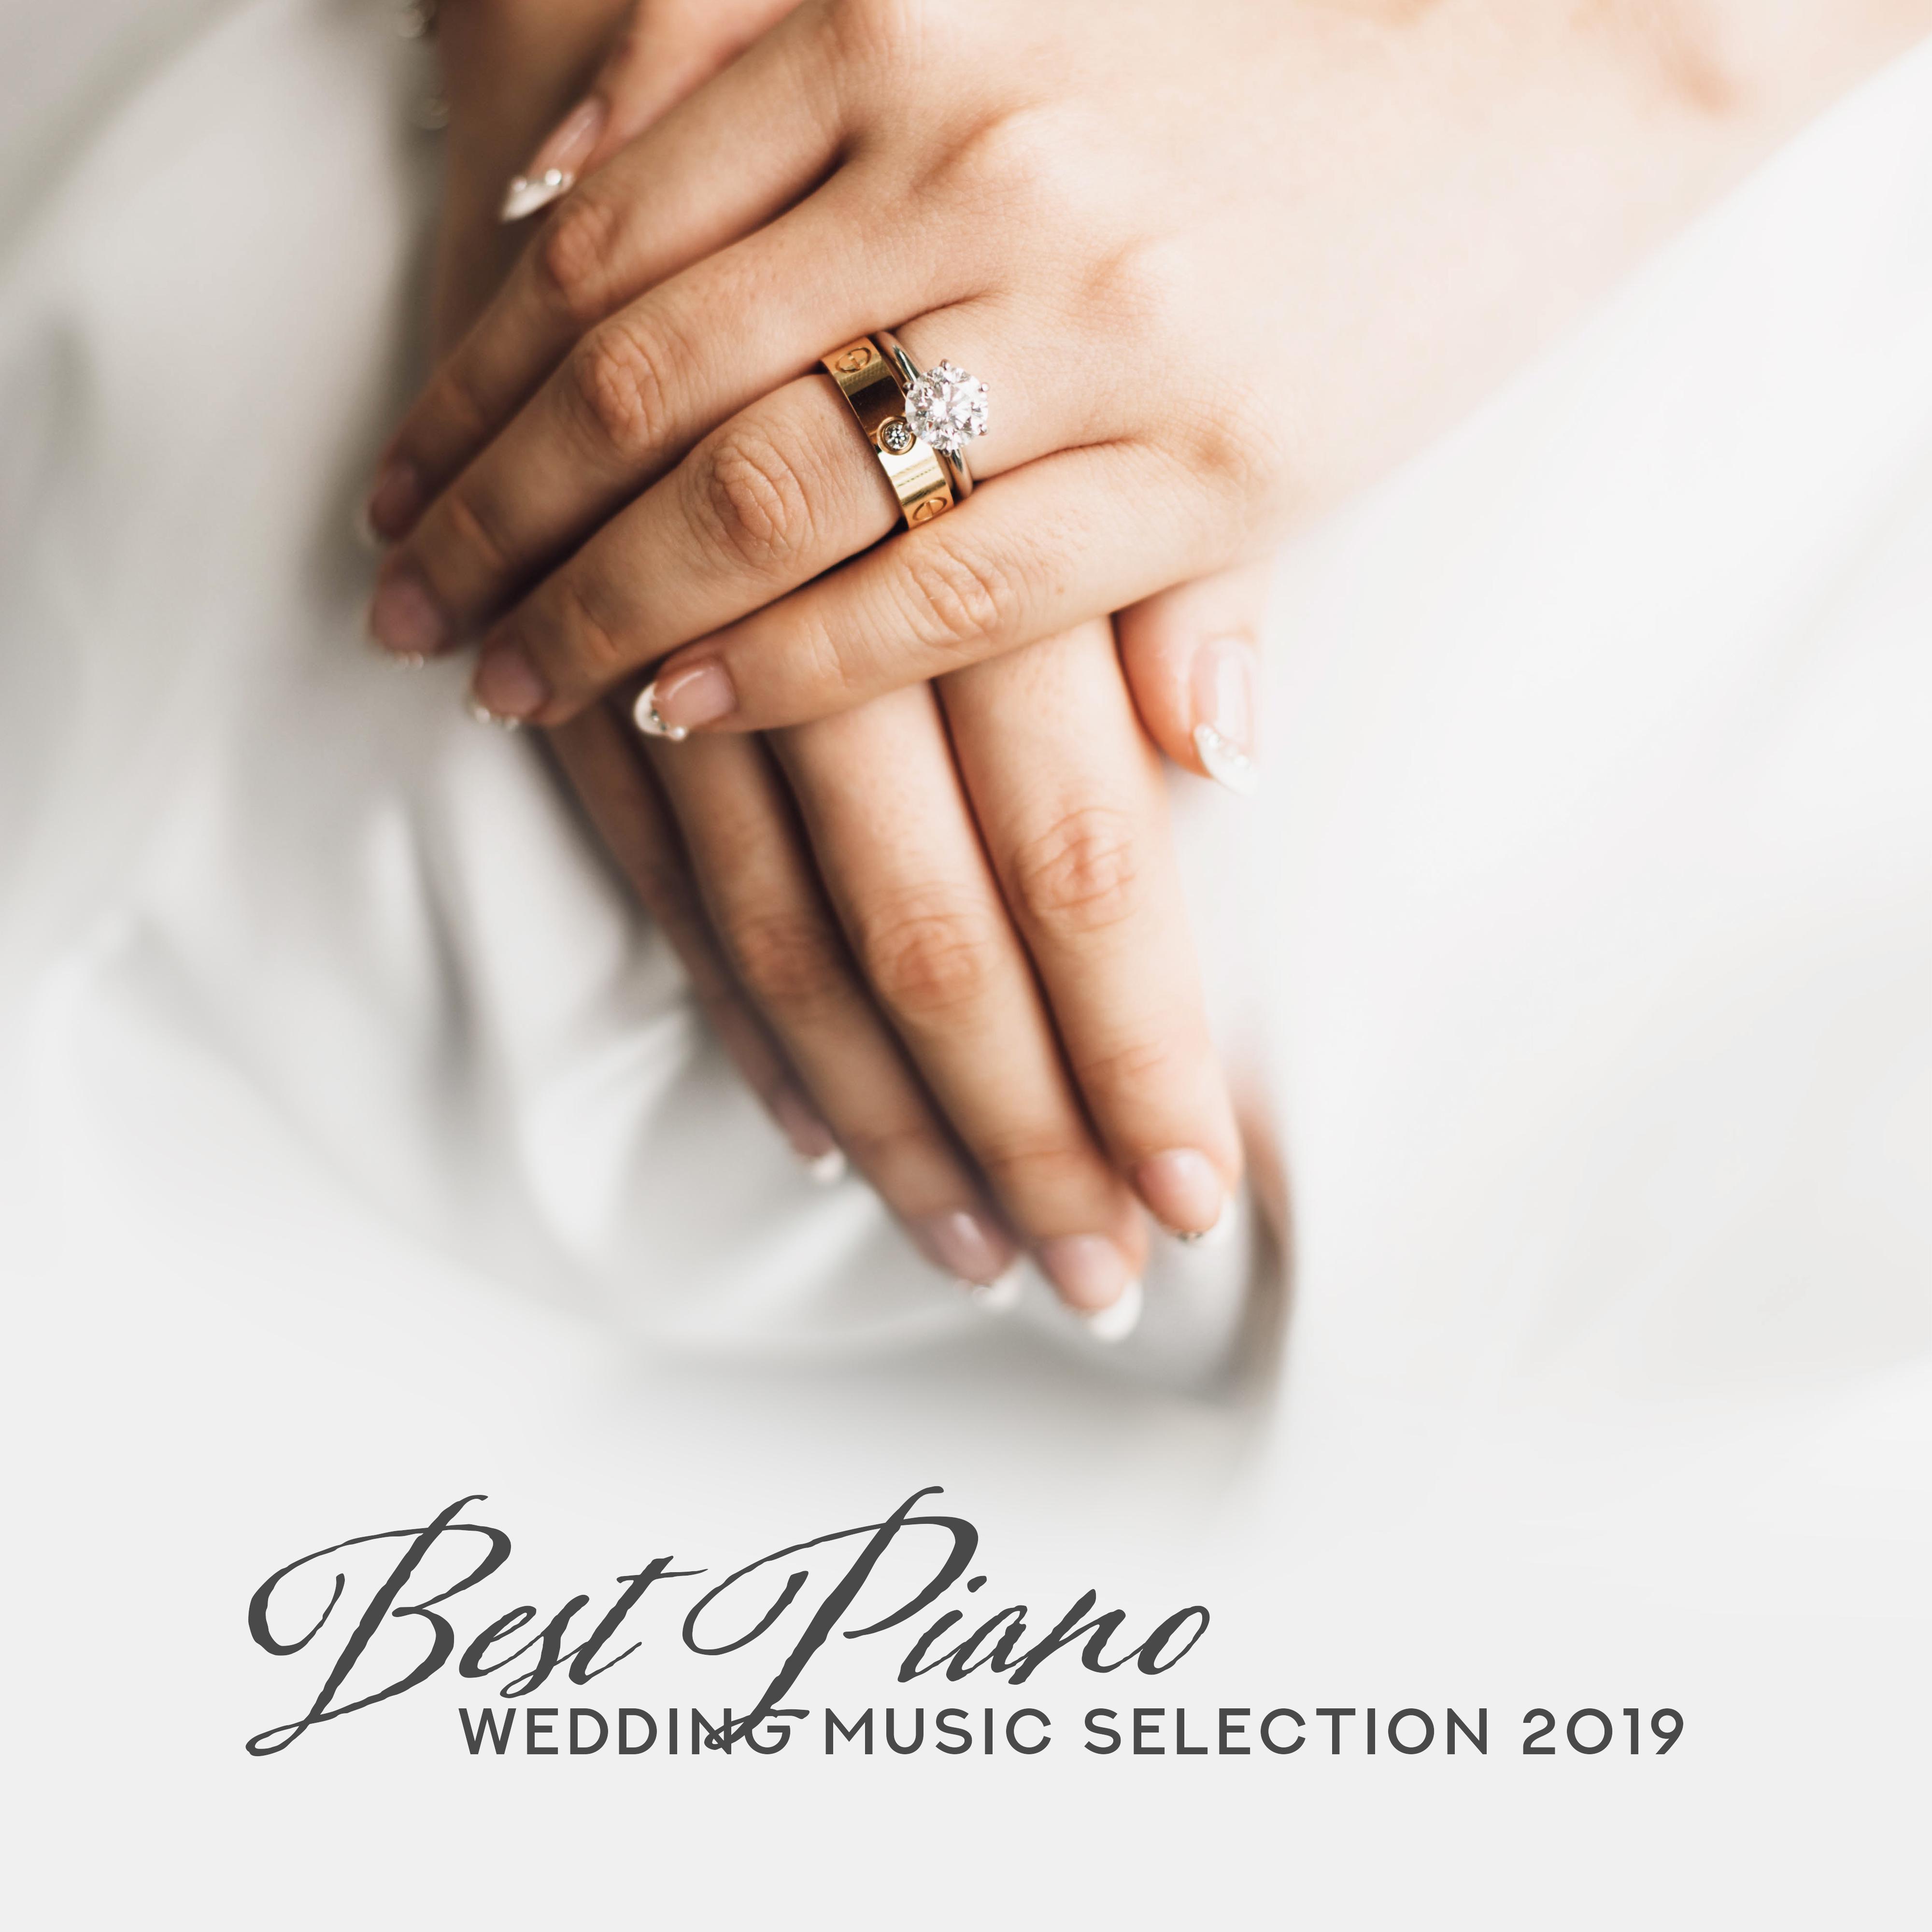 Best Piano Wedding Music Selection 2019